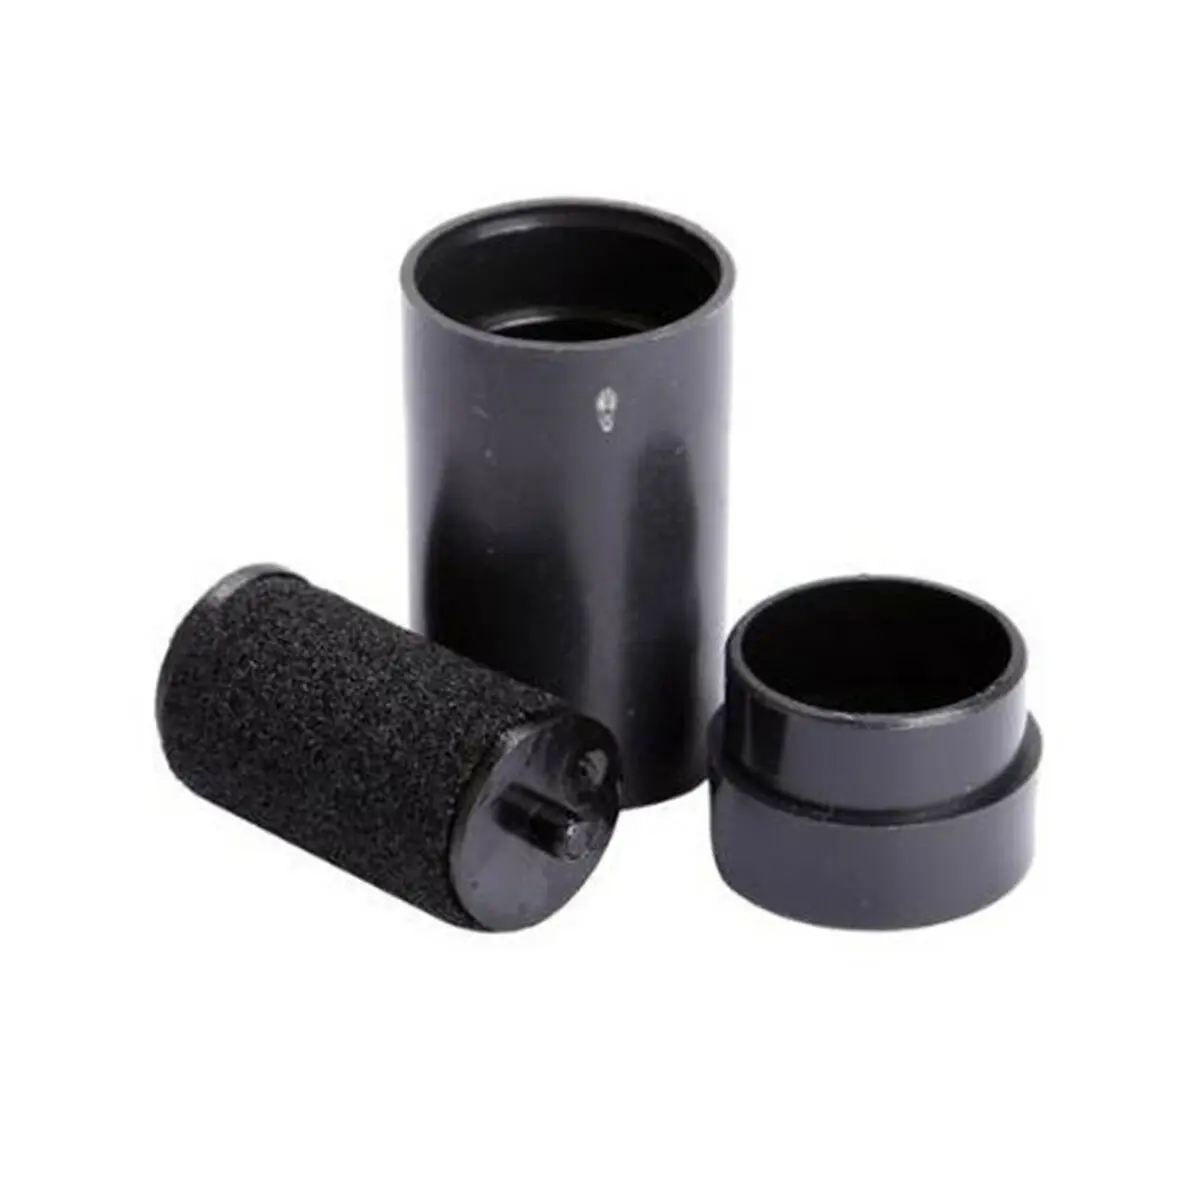 2PCS Refill Ink Rolls Ink Labeller Cartridge For MX-6600 MX5500 Price Tag Gun MO 